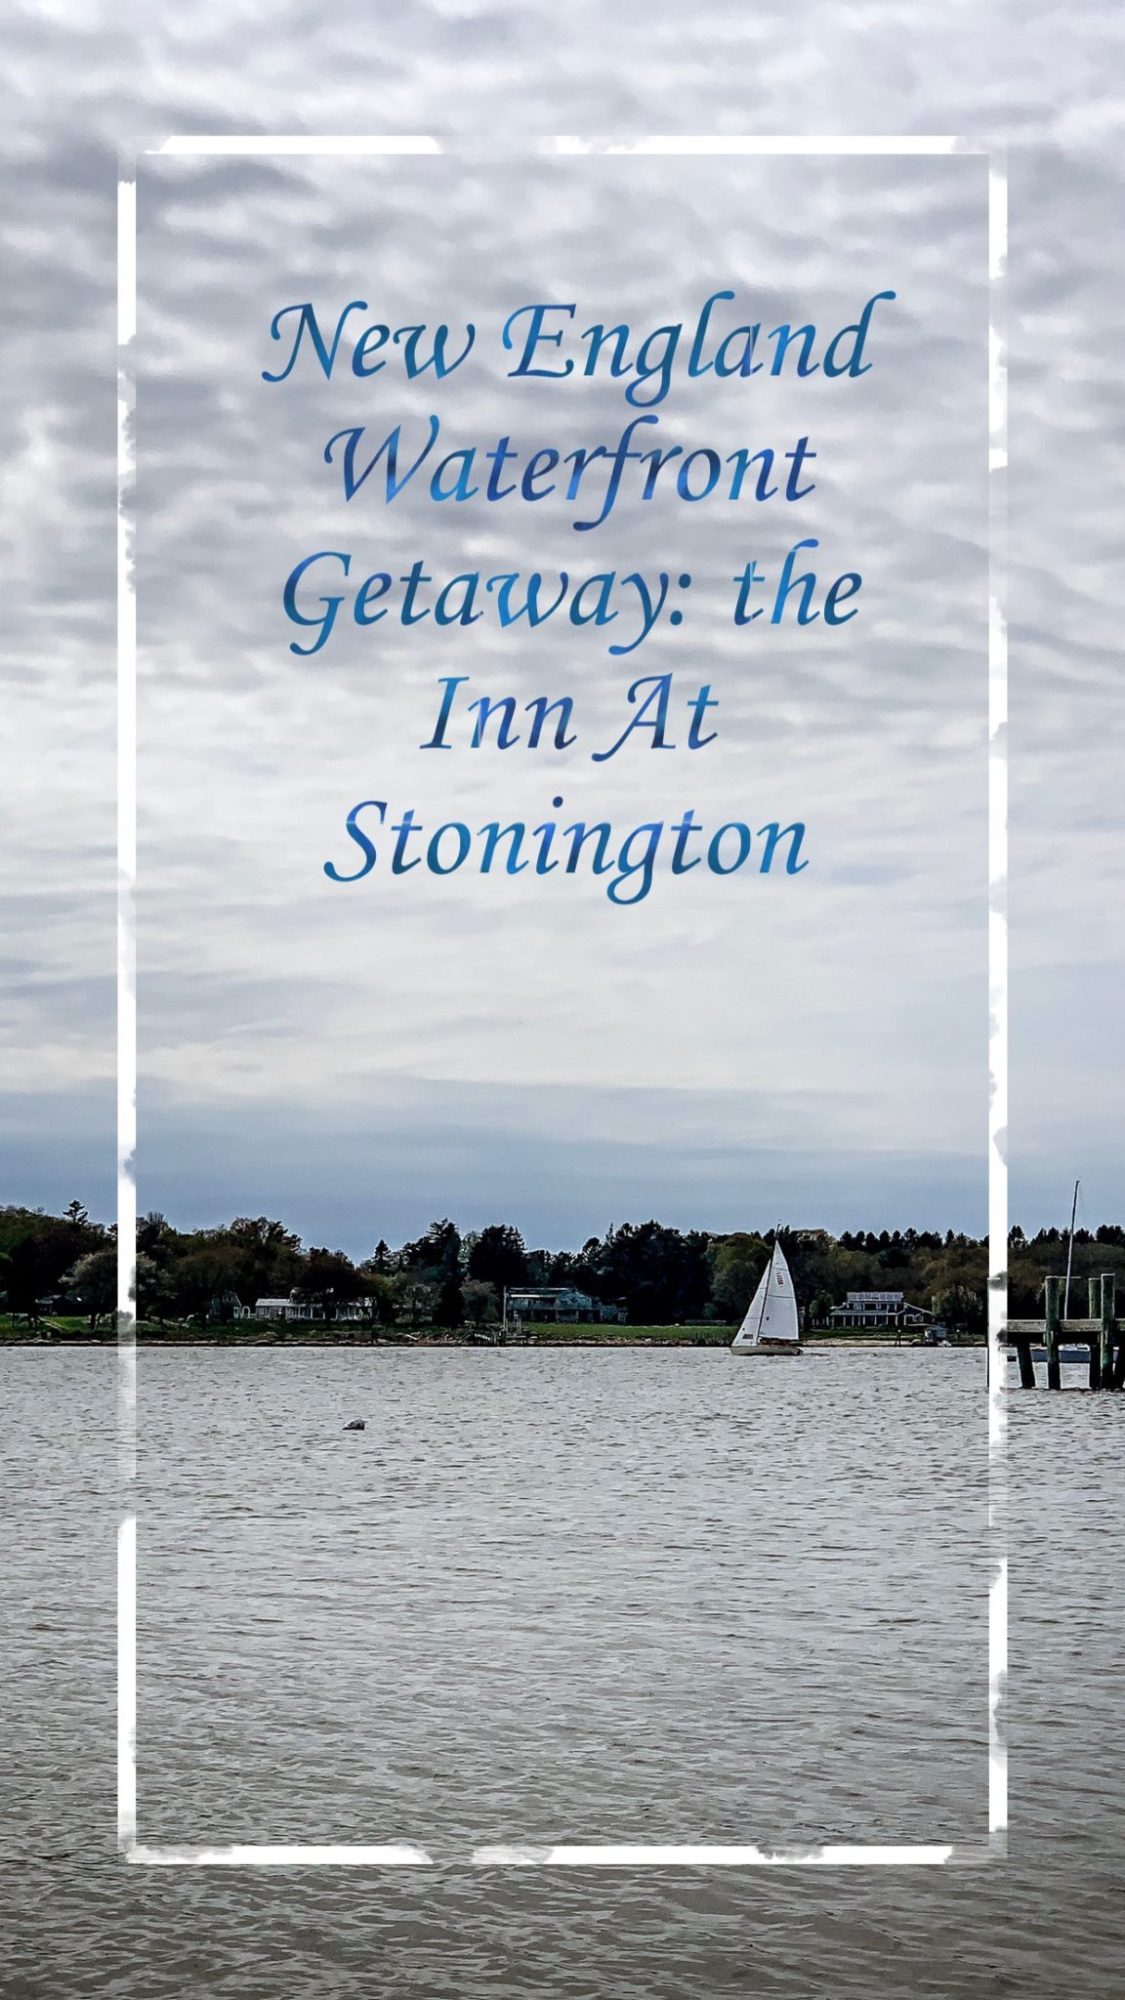 New England Waterfront Getaway: the Inn at Stonington reviewed by top US travel blogger, Shannon Shipman